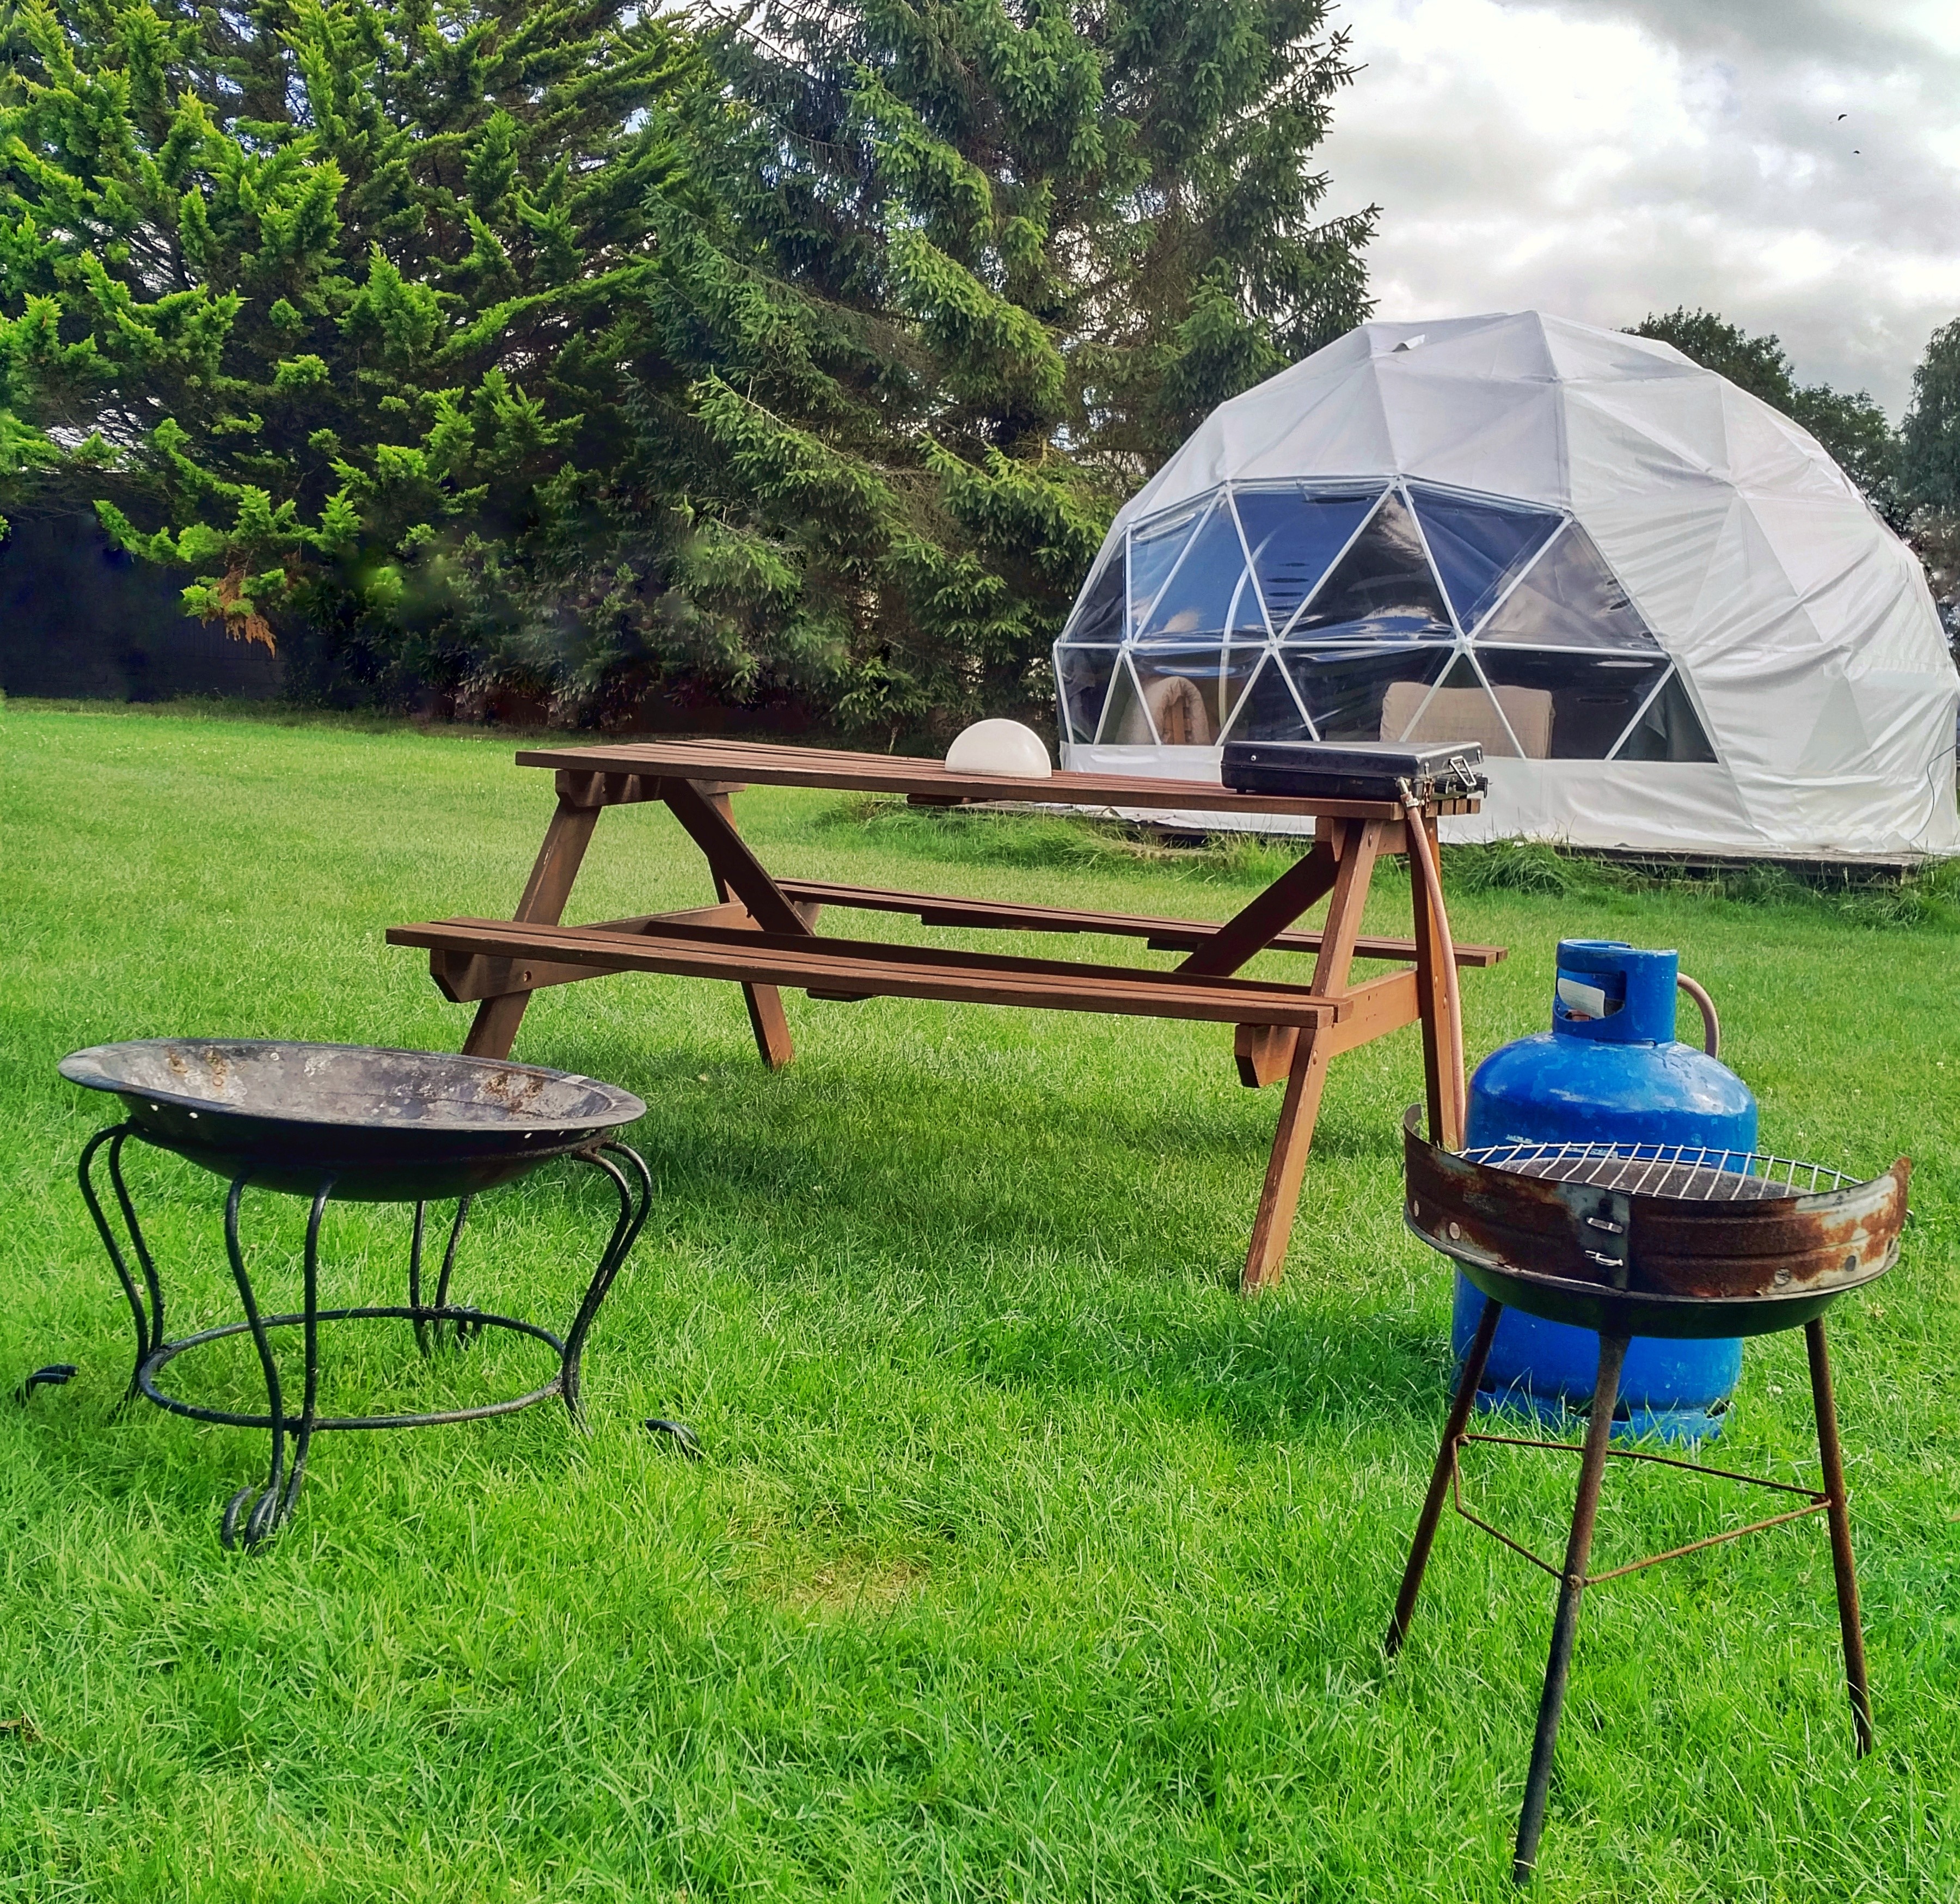 Glamping Dome in Dorset, UK at DCHE